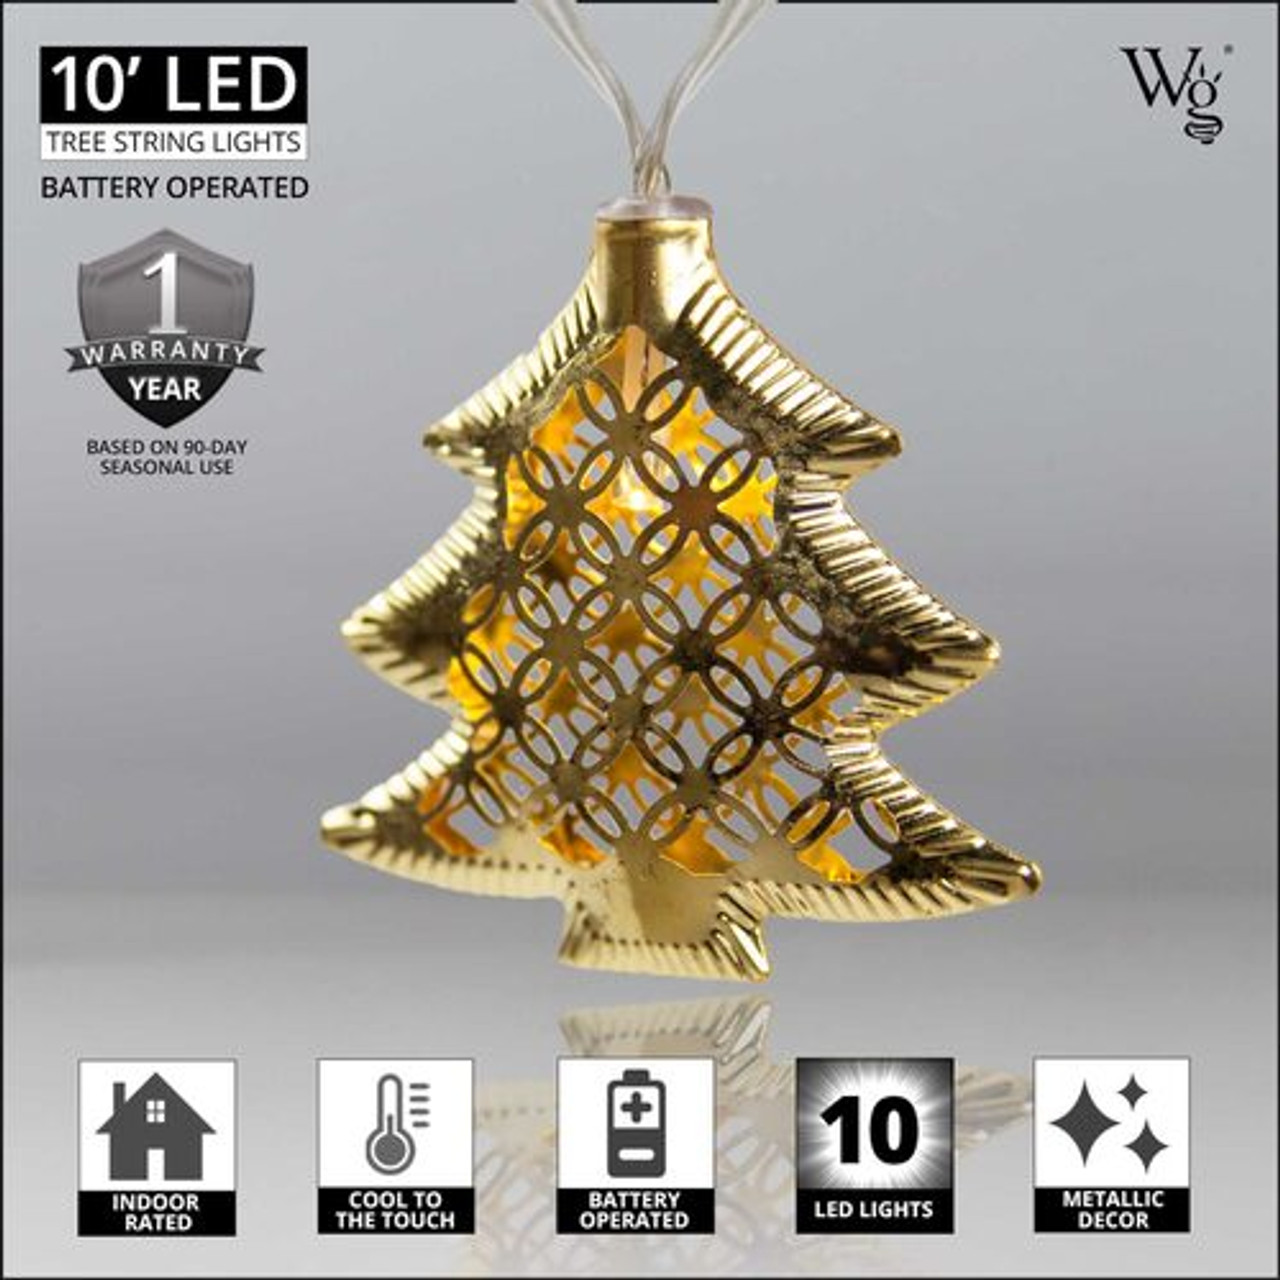 https://cdn11.bigcommerce.com/s-tjrce8etun/images/stencil/1280x1280/products/1409/1925/feature1-led-battery-operated-golden-metal-tree-10-warm-white-light__84382.1692416804.jpg?c=1?imbypass=on